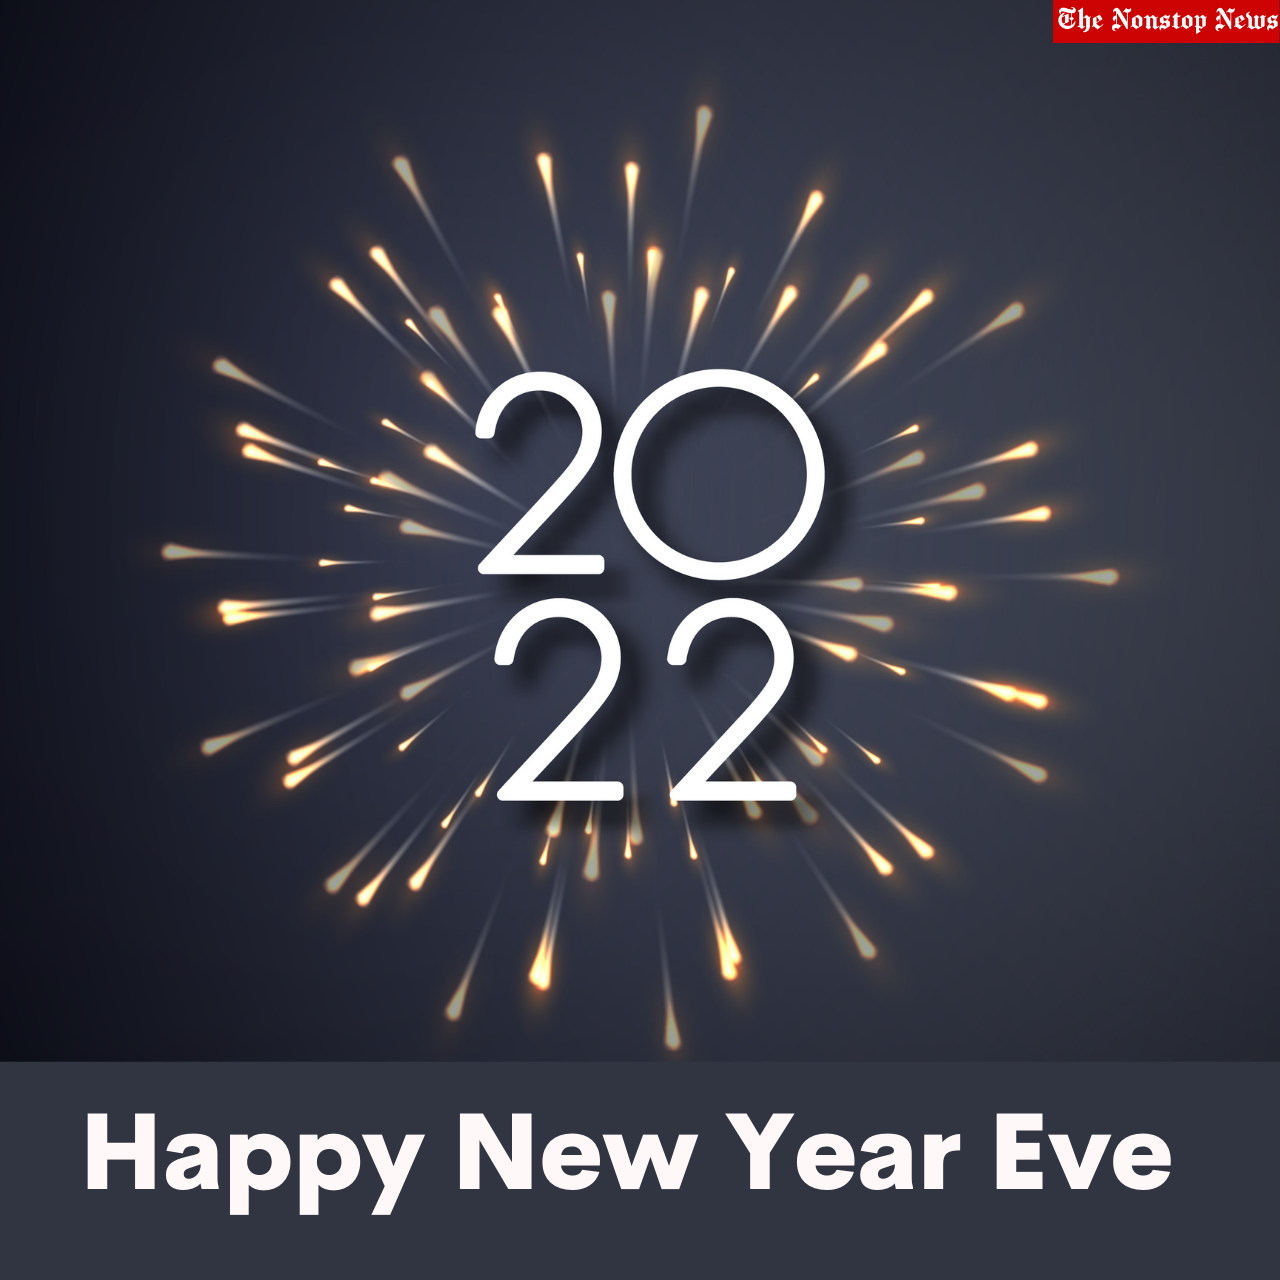 Happy New Year Eve 2022 Wishes, Quotes, Sayings, Cliparts, Messages, Greetings, and HD Images to greet Boyfriend/Girlfriend